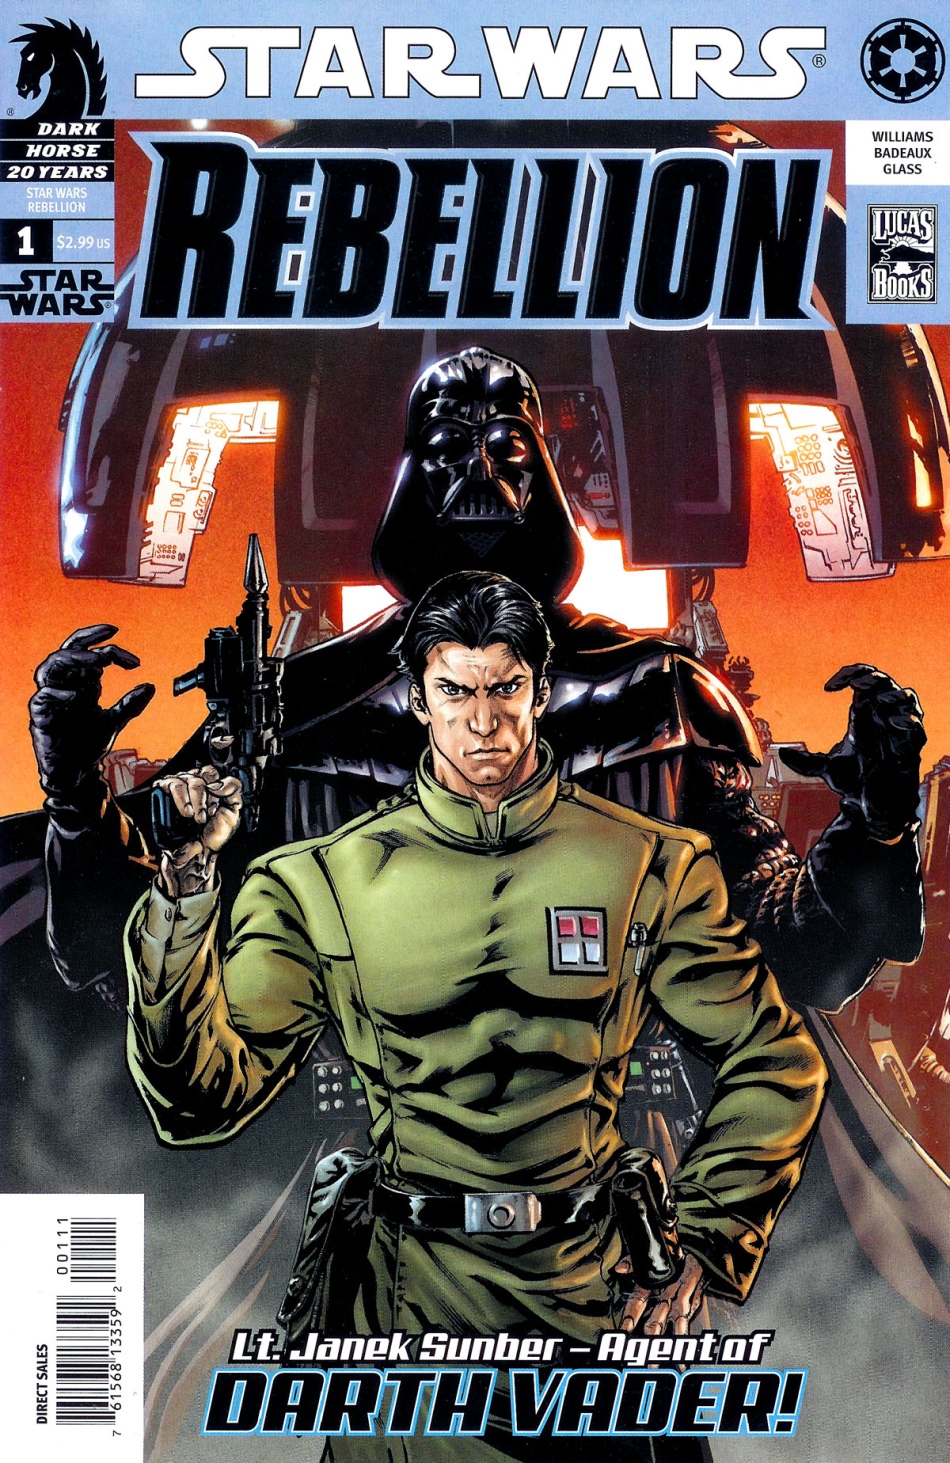 Rebellion #1: My Brother, My Enemy, Part 1 (12.04.2006)